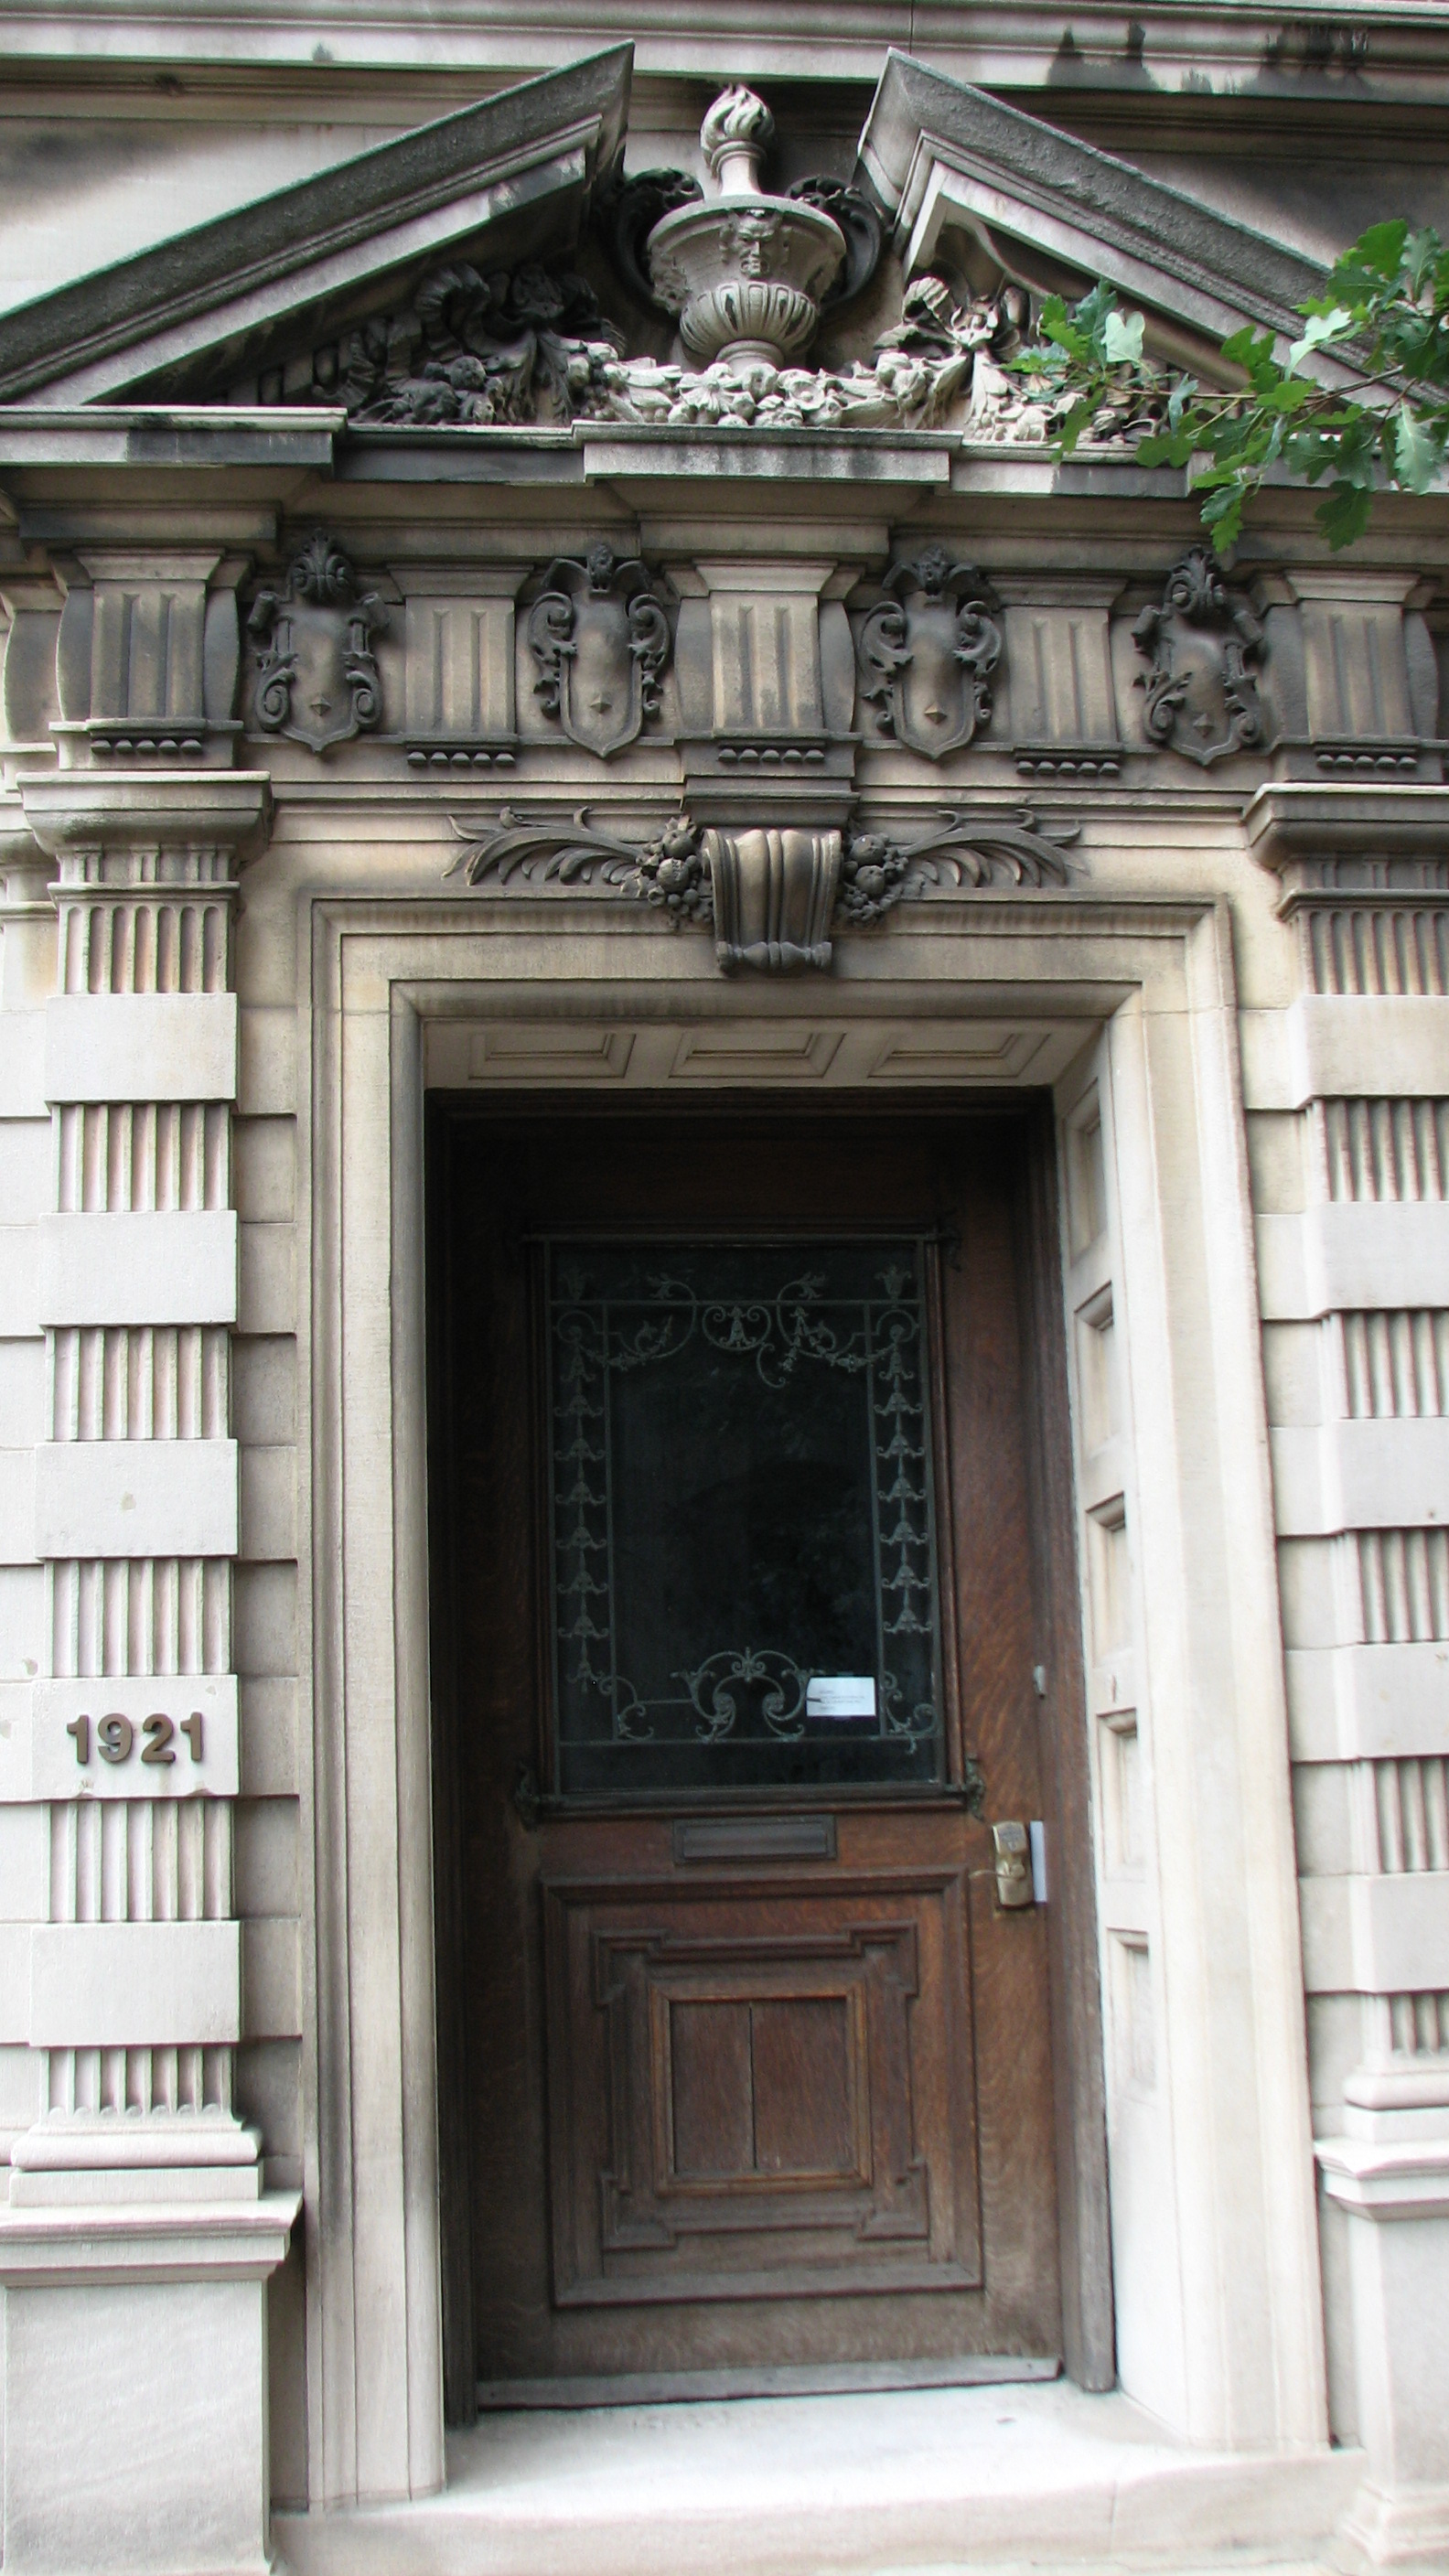 The entrance to 1921 Walnut St.